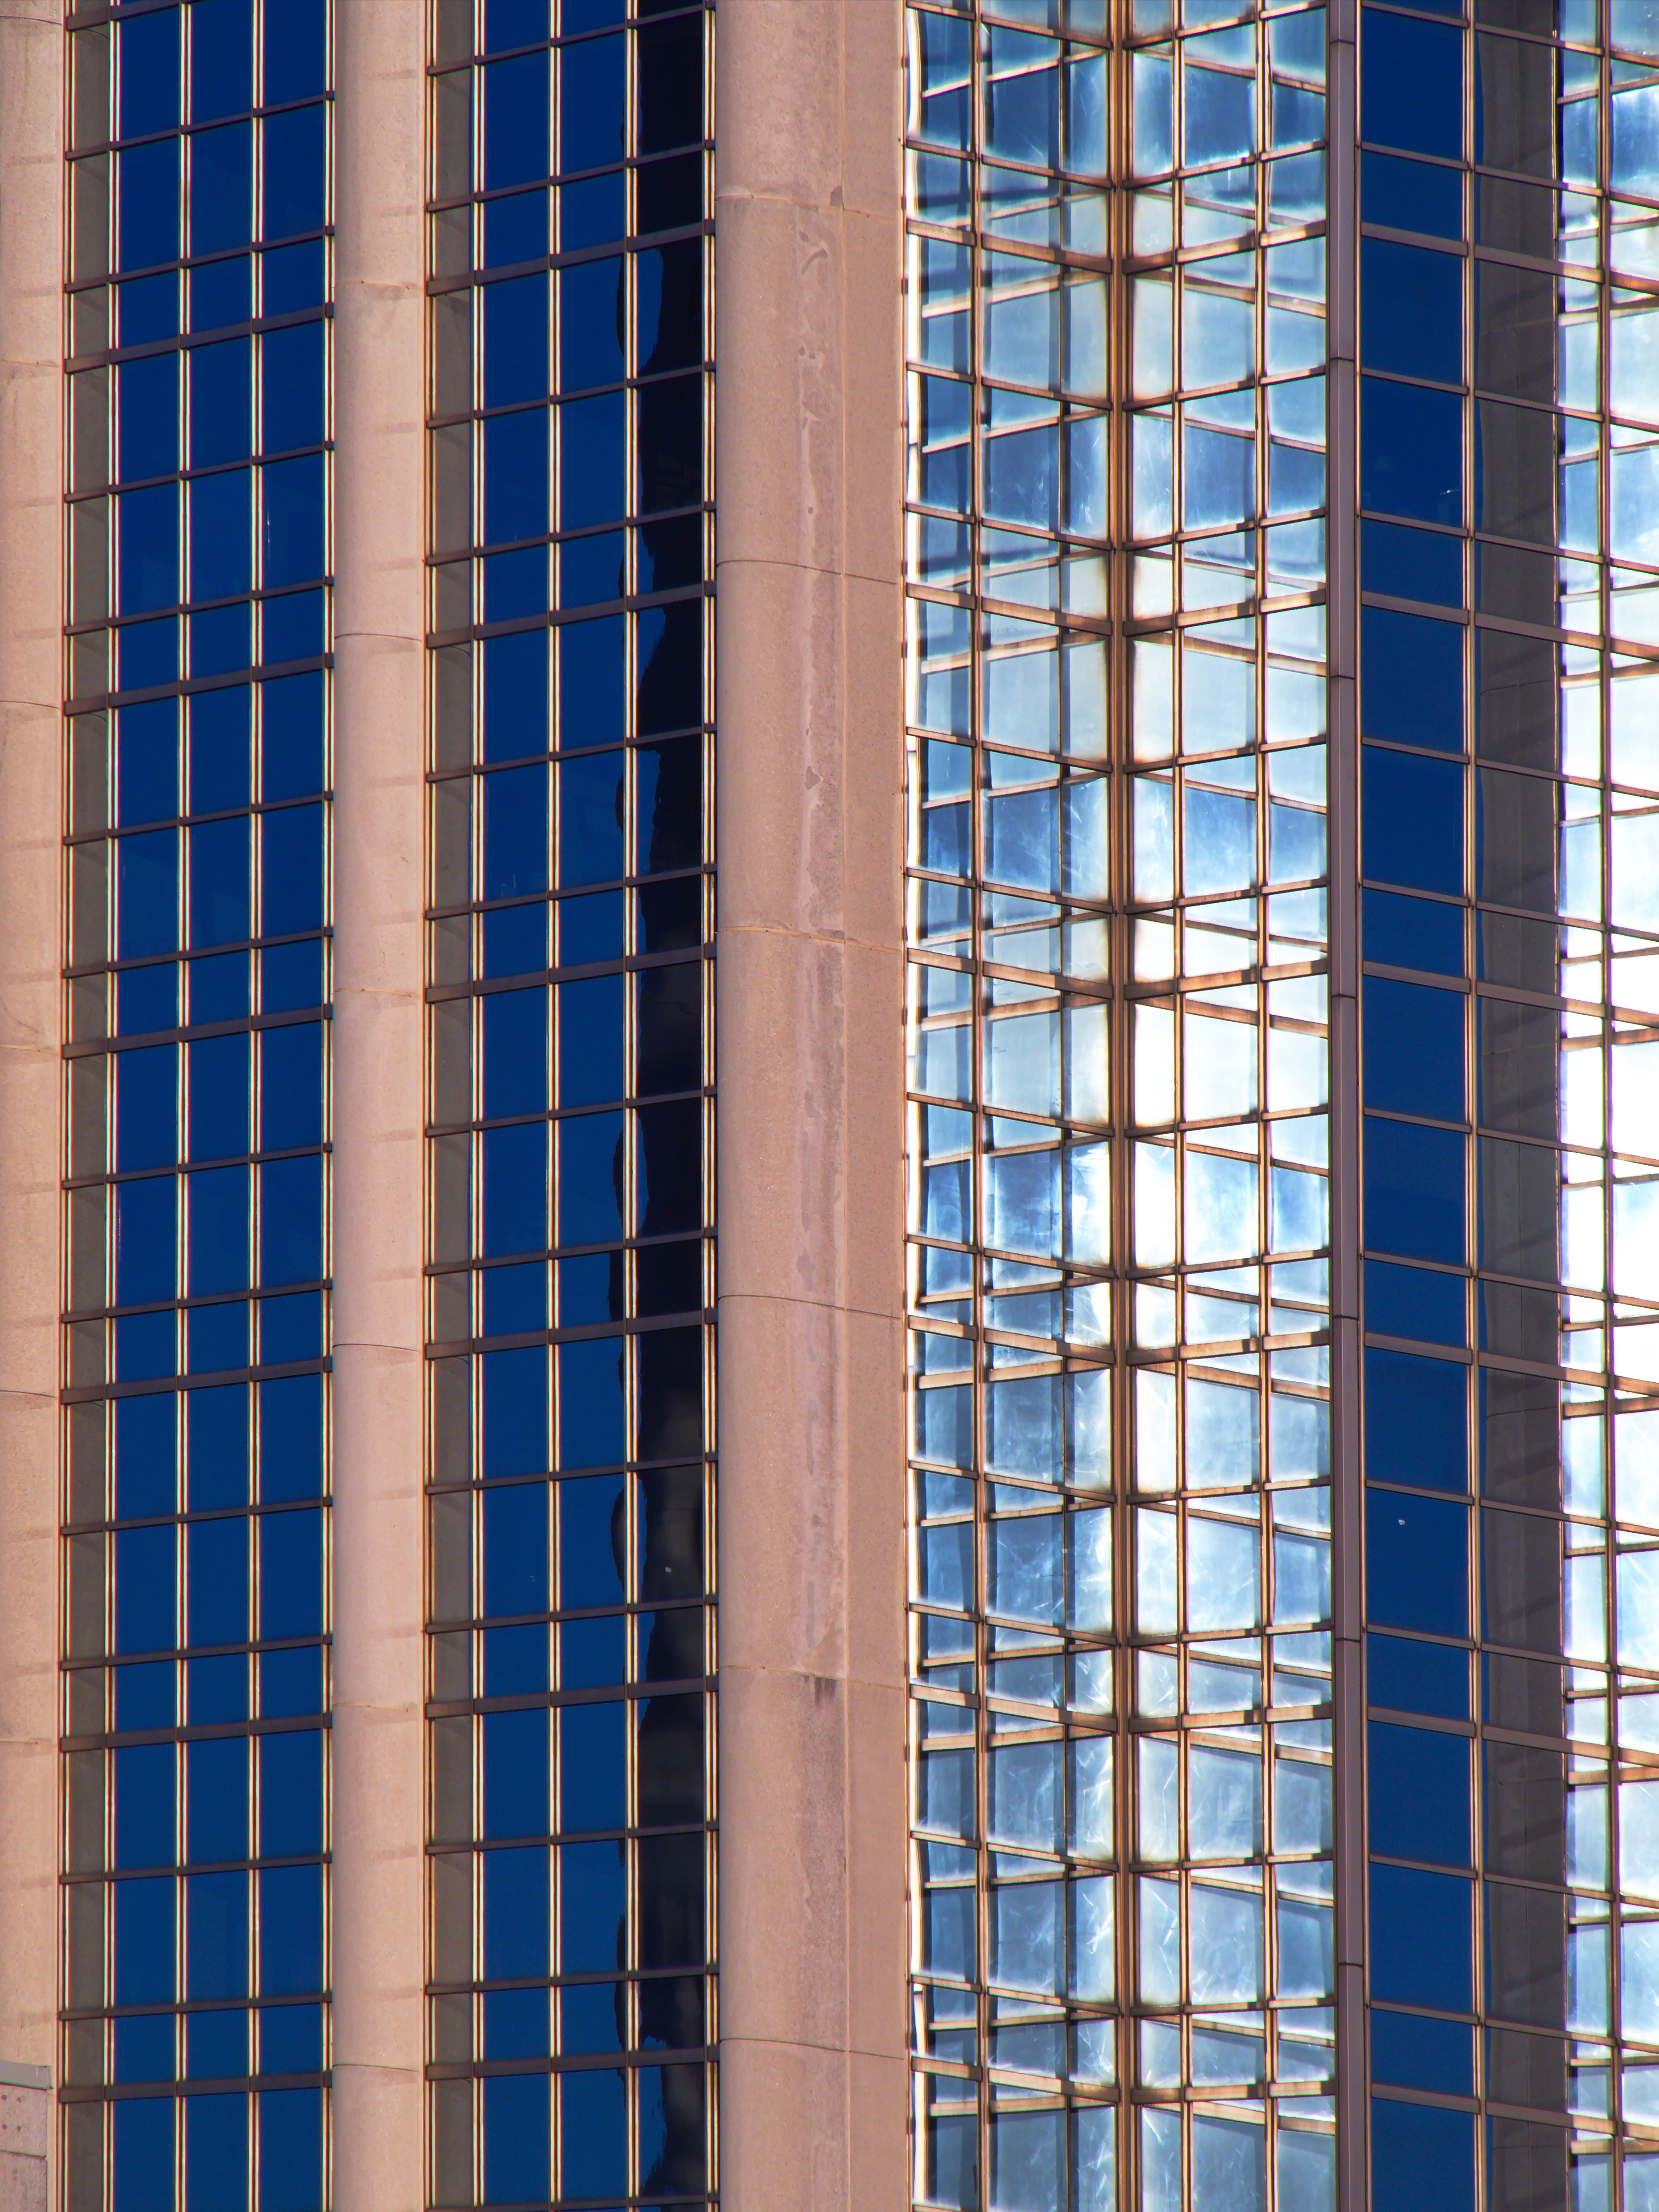 Building Architecture Glass Reflection Facade